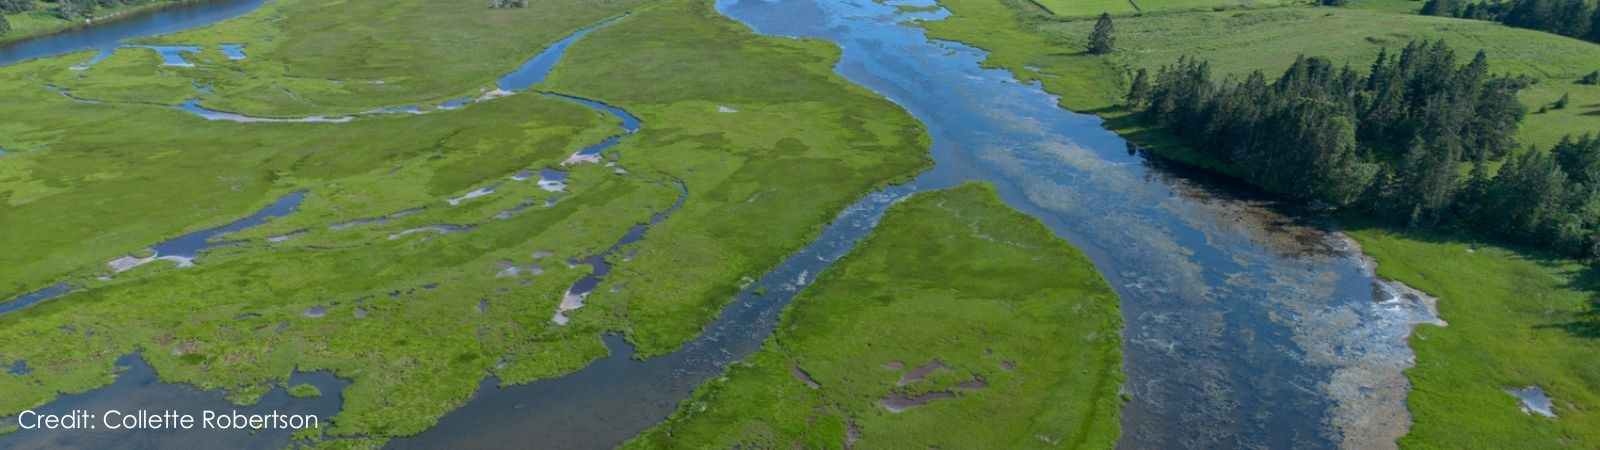 a aerial photo of a wetland. patches of green grass are separated by waterways, with a stand of coniferous trees visible on the right side